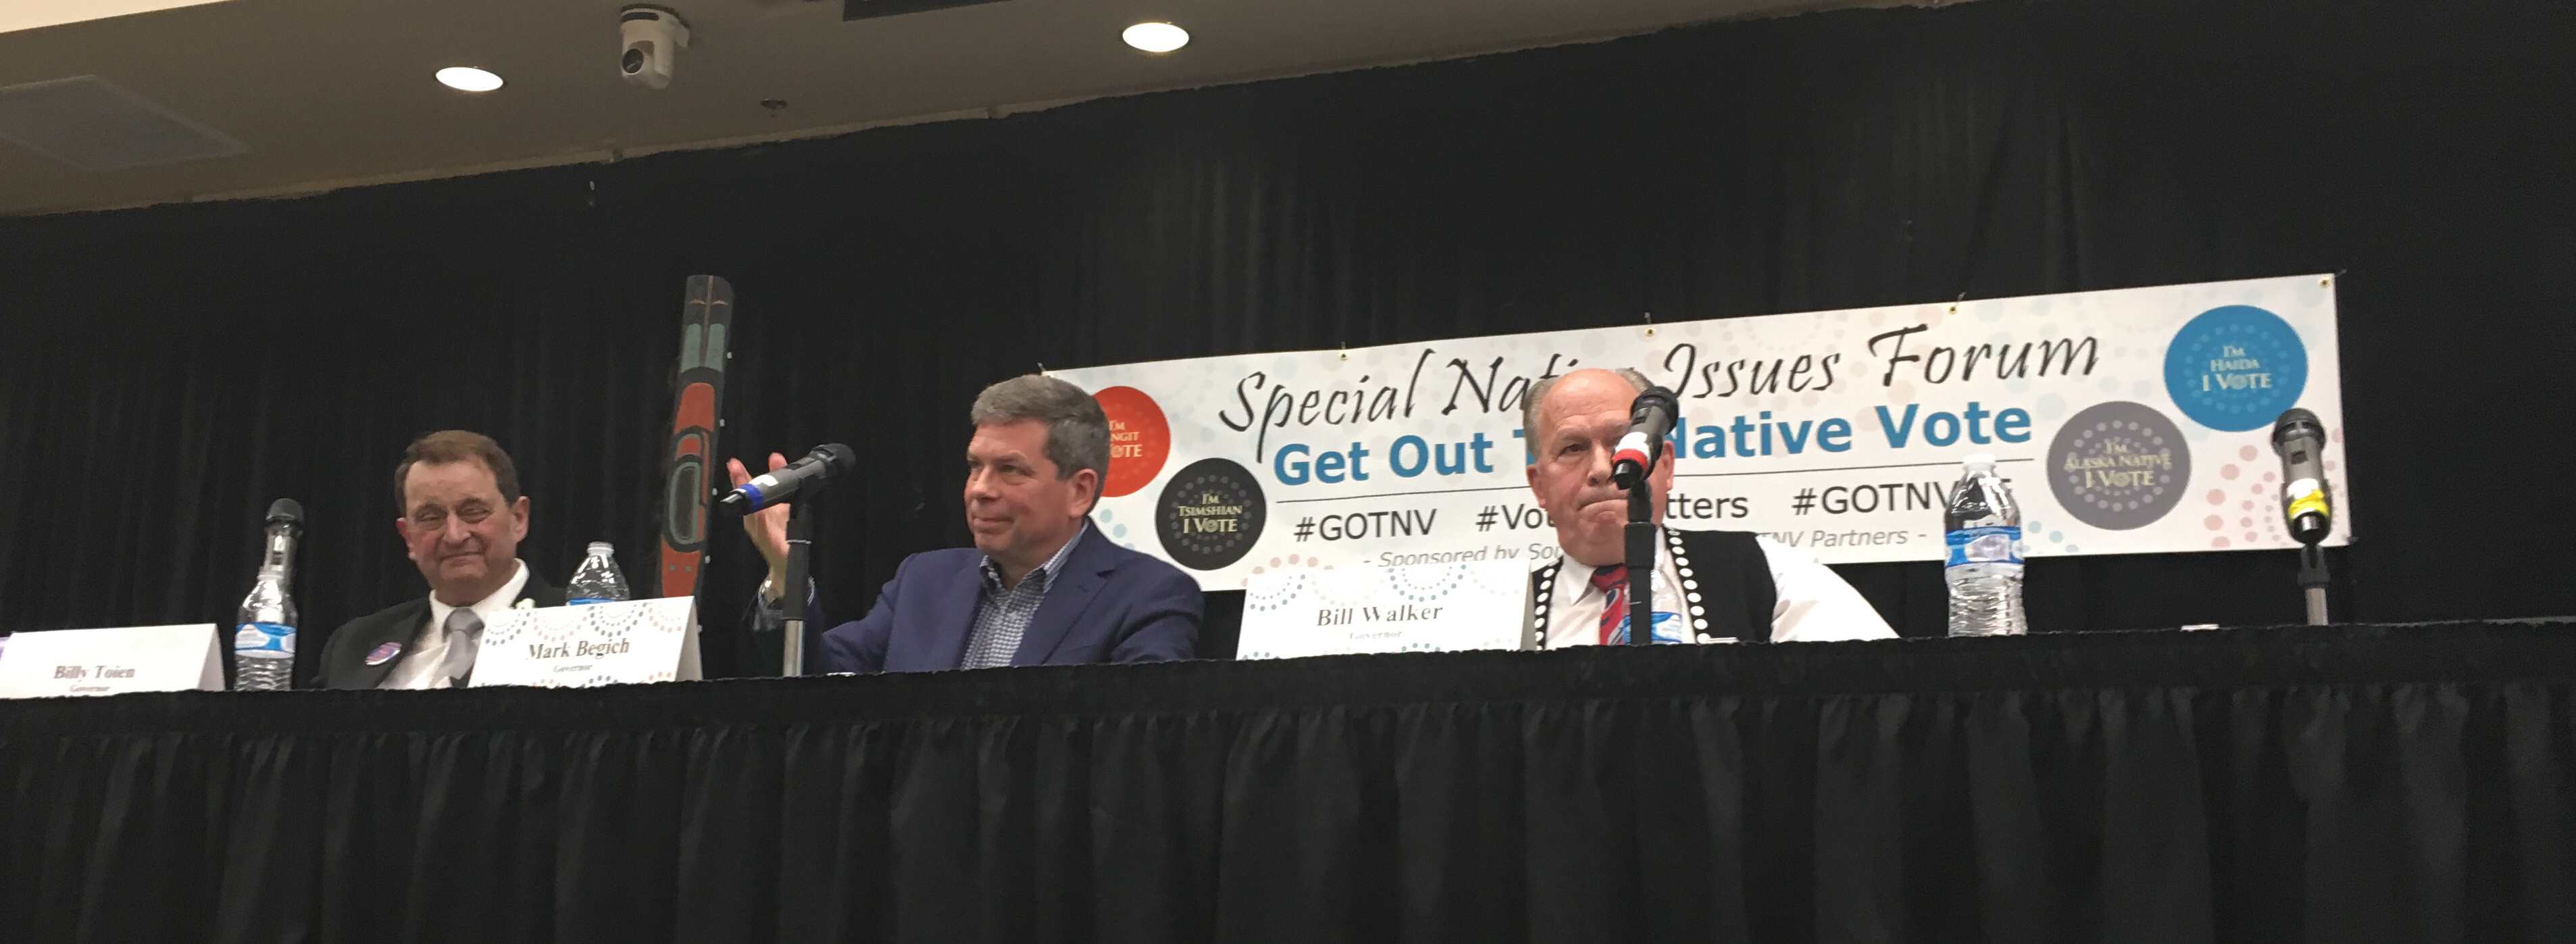 Libertarian Billy Toien, Democrat Mark Begich and independent Gov. Bill Walker receive audience applause at the end of the Get Out the Native Vote candidate forum, Oct. 2, 2018, in Juneau. The microphone on the right is for Republican Mike Dunleavy, who didn't attend. (Photo by Andrew Kitchenman/KTOO and Alaska Public Media)